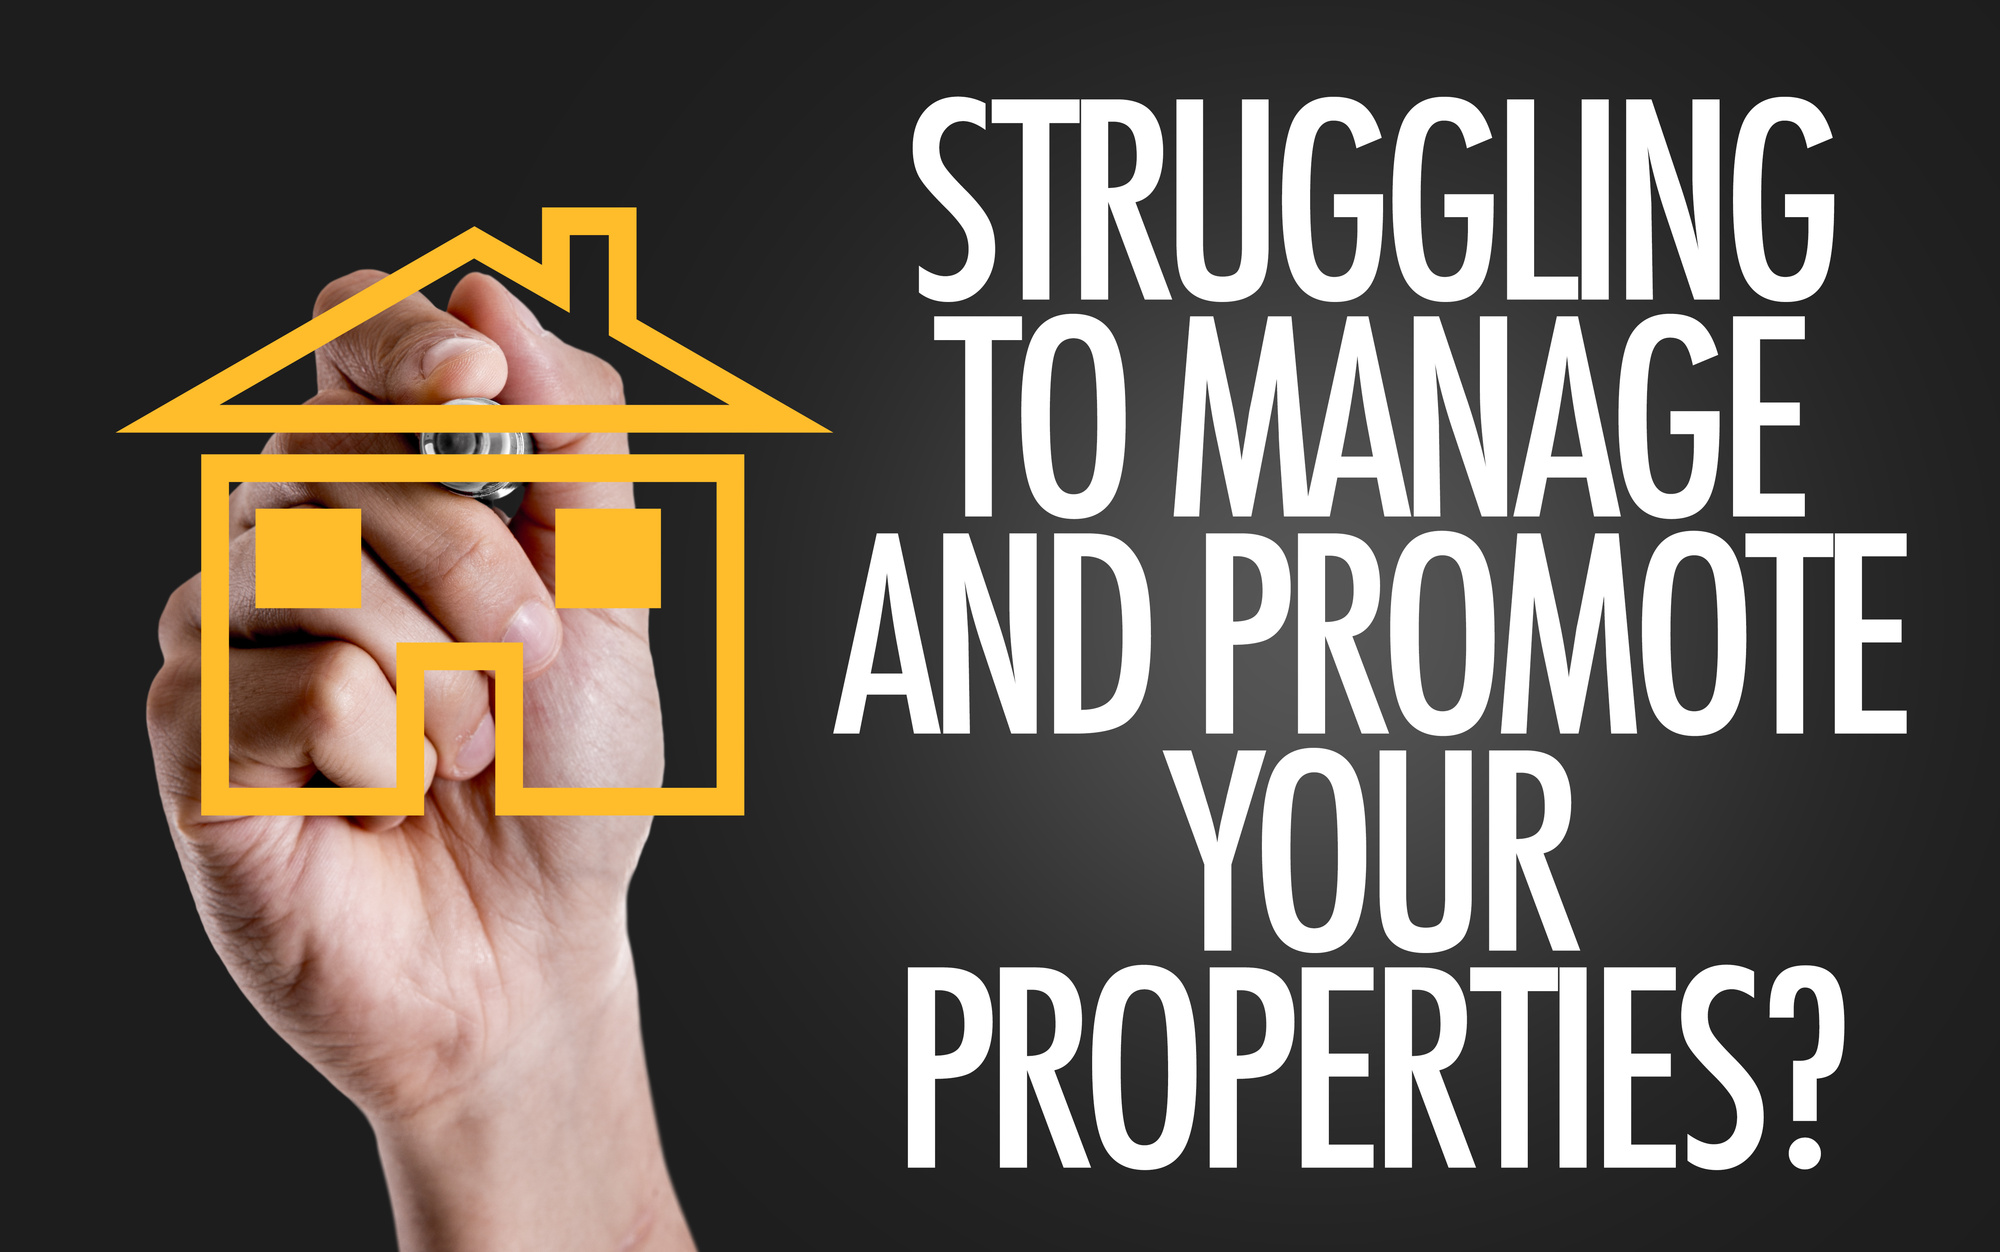 Are Property Management Services Worth It? (The Answer Is Yes)